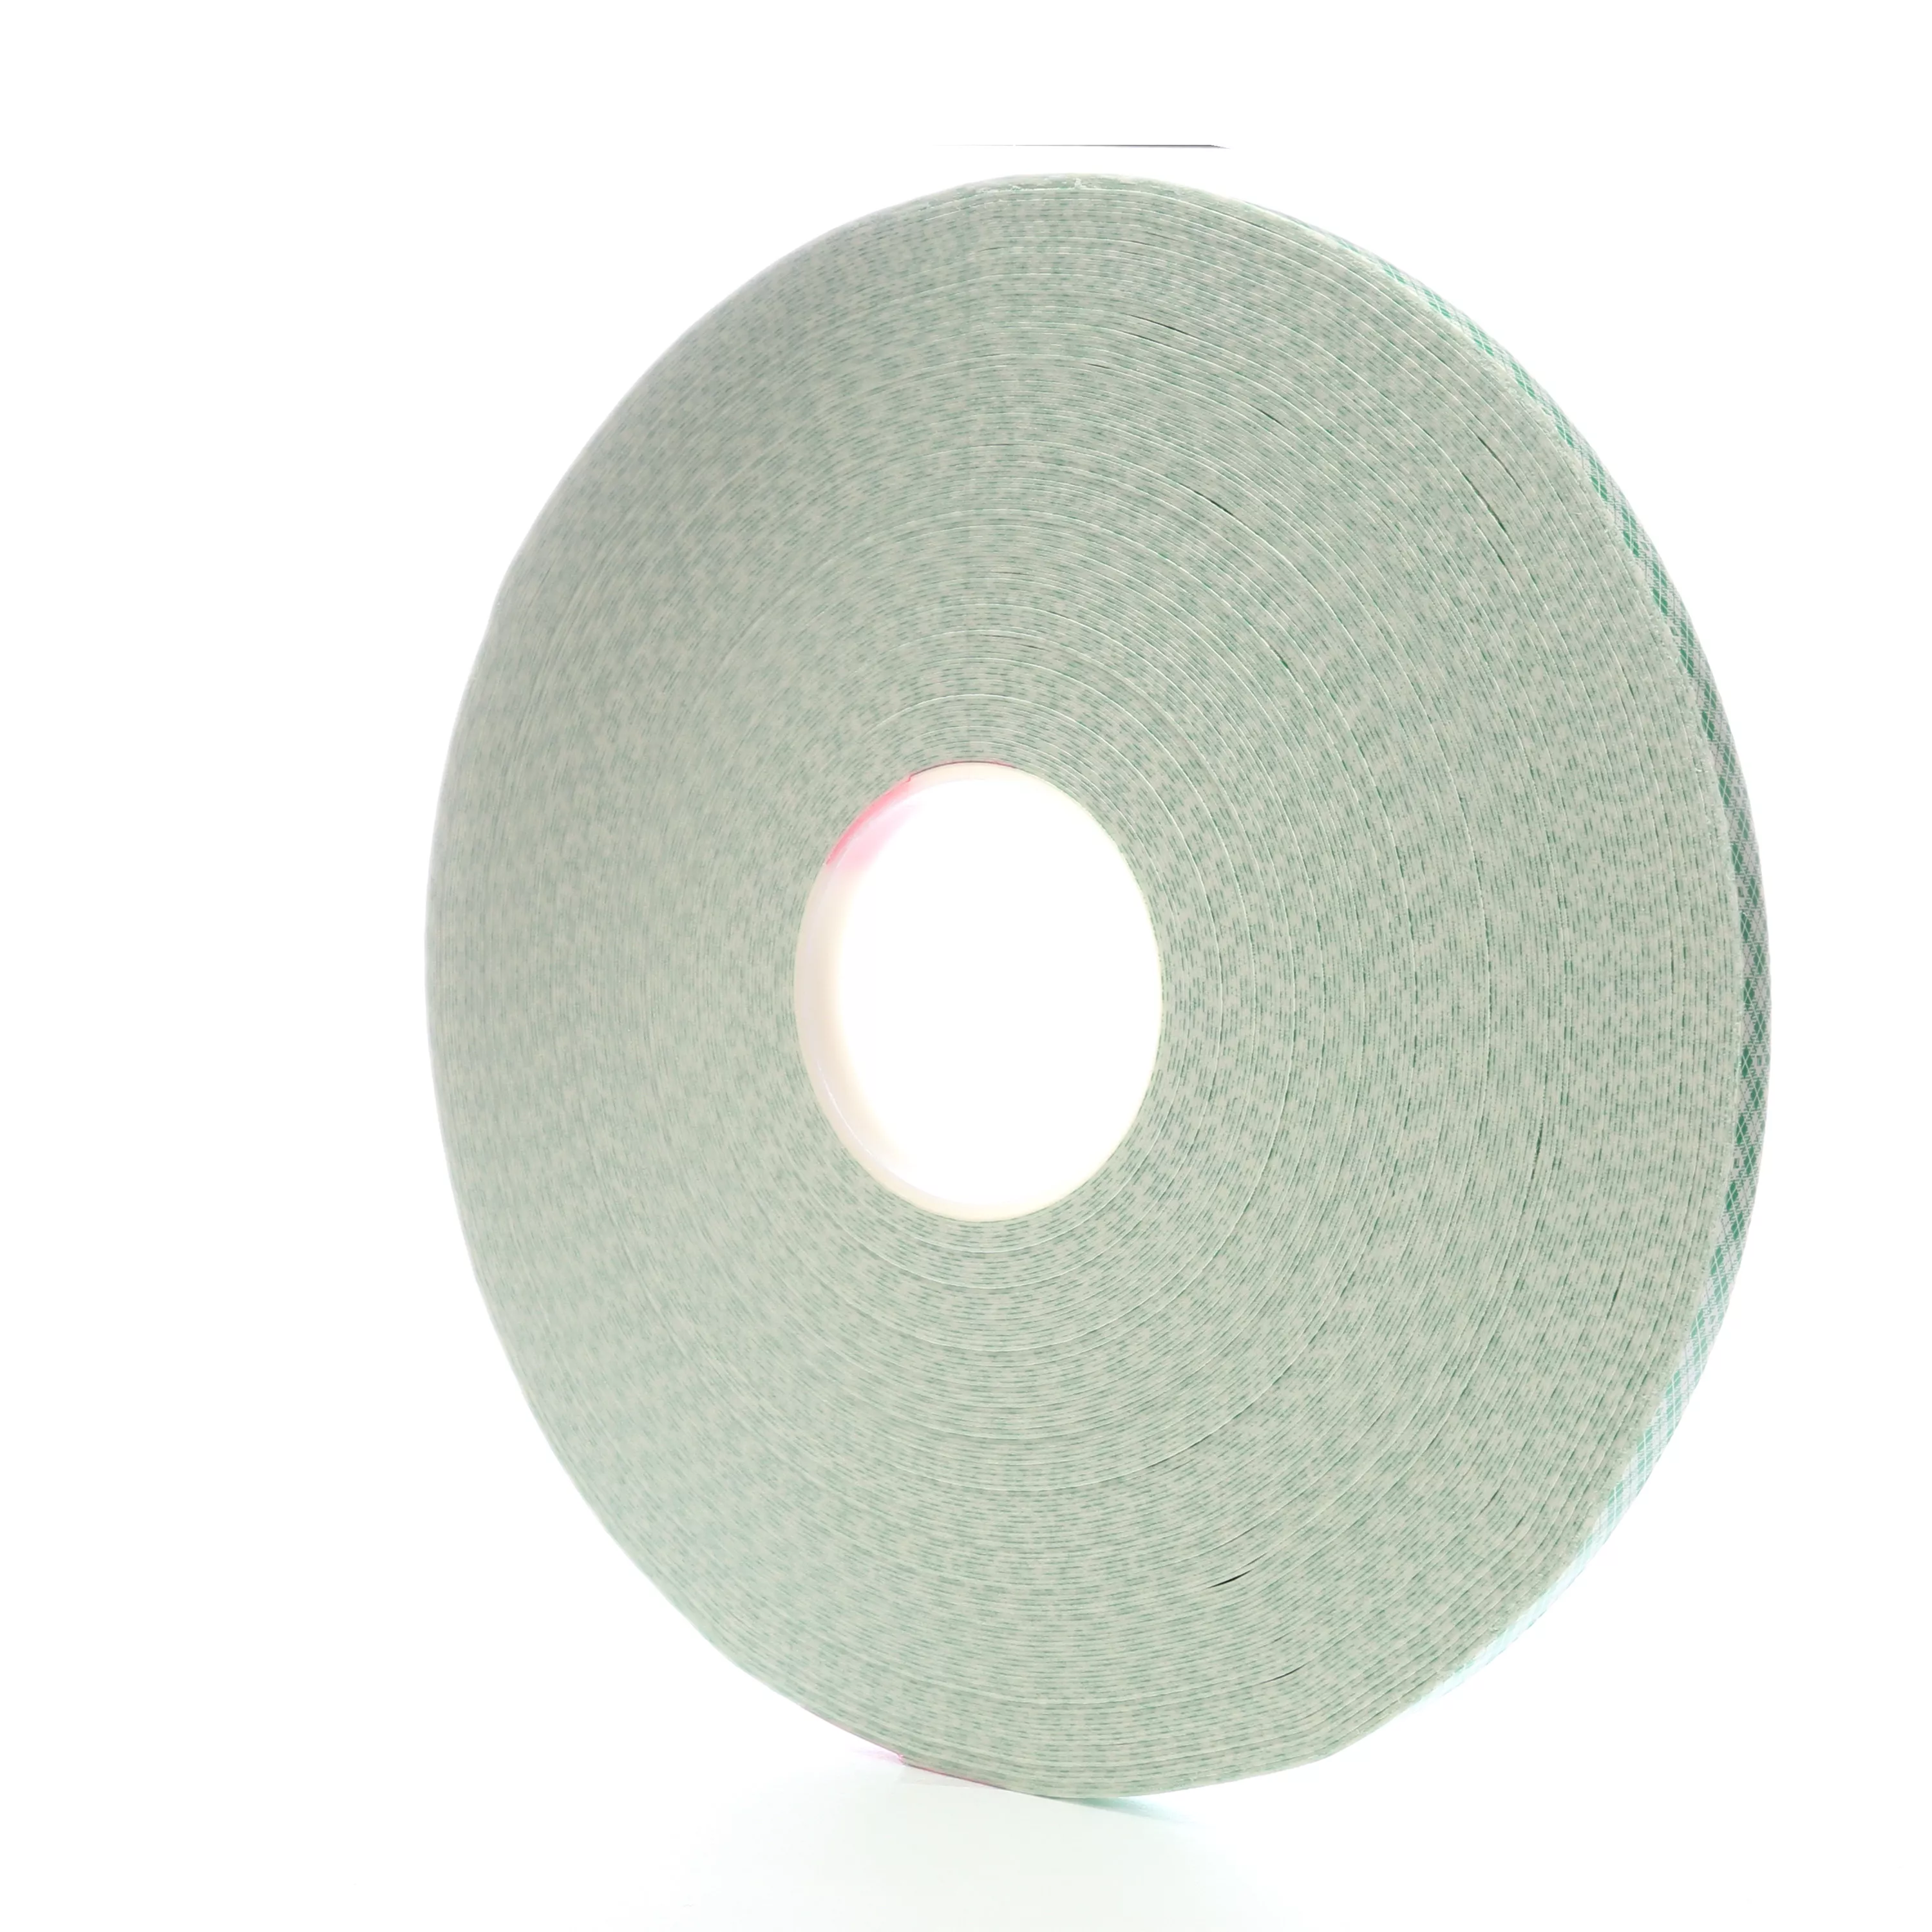 3M™ Double Coated Urethane Foam Tape 4032, Off White, 1/2 in x 72 yd, 31
mil, 18 Rolls/Case